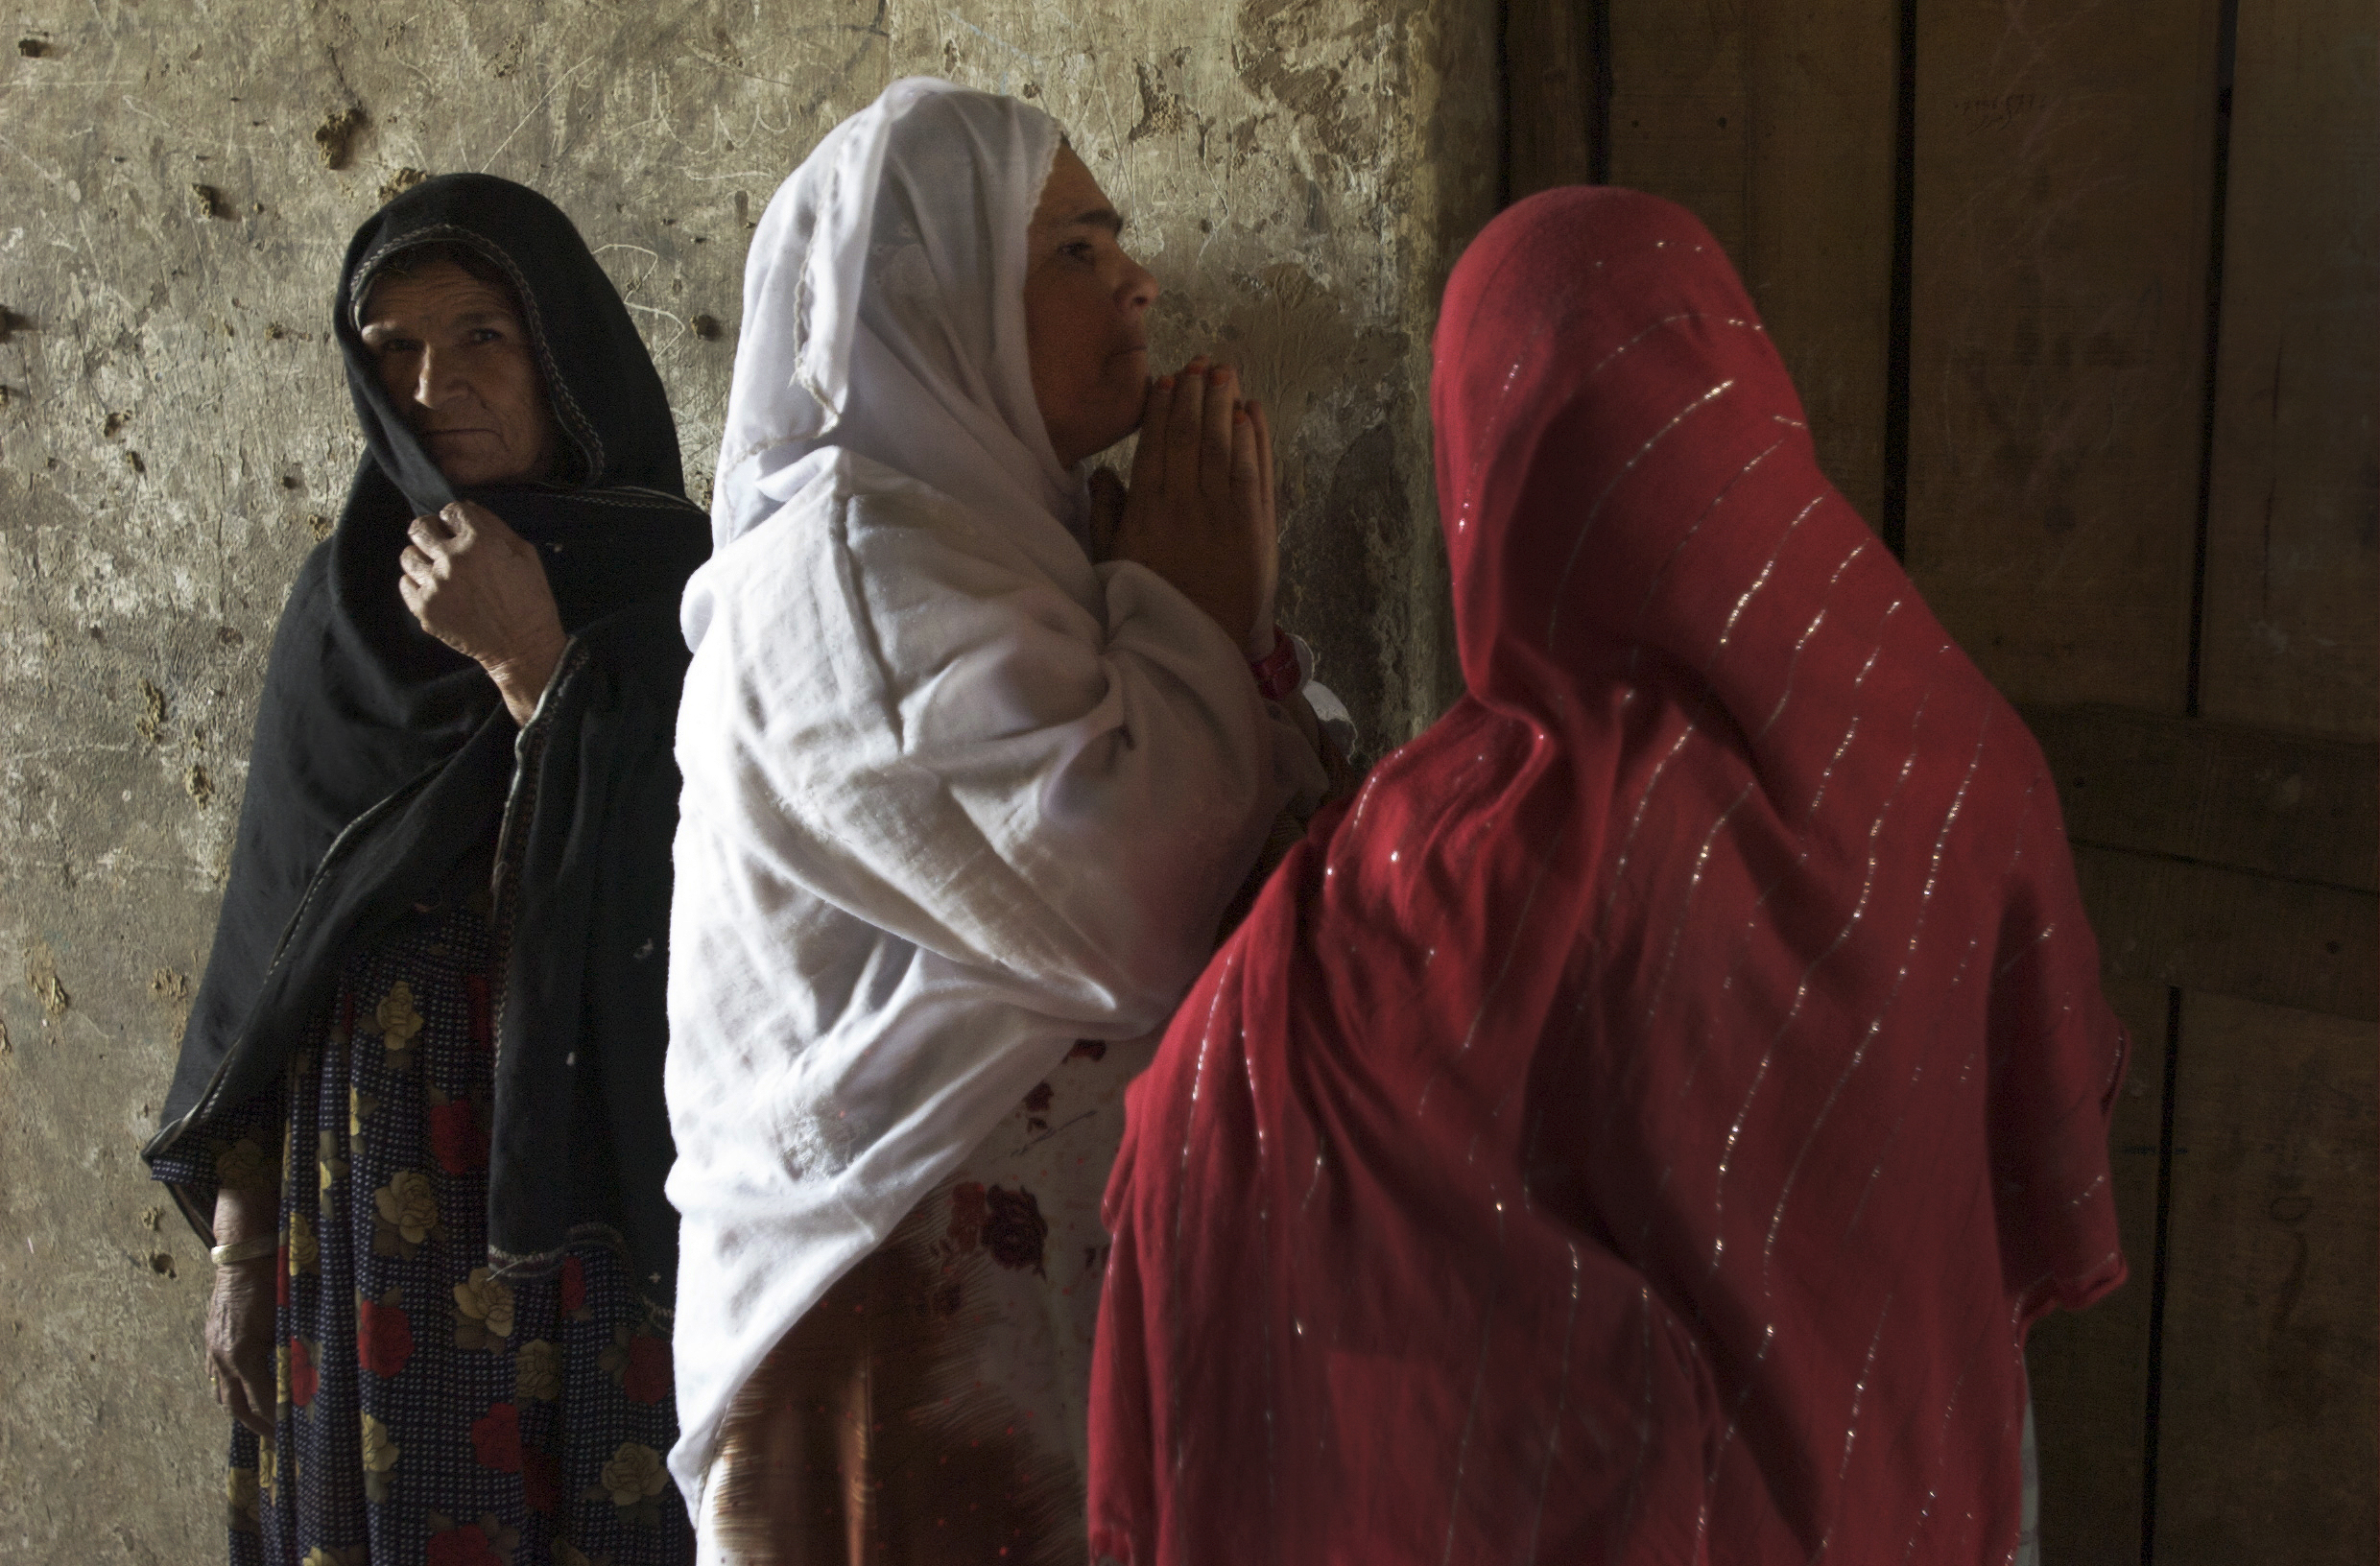 to women, children and adolescents in Afghanistan; and to develop its Integ...